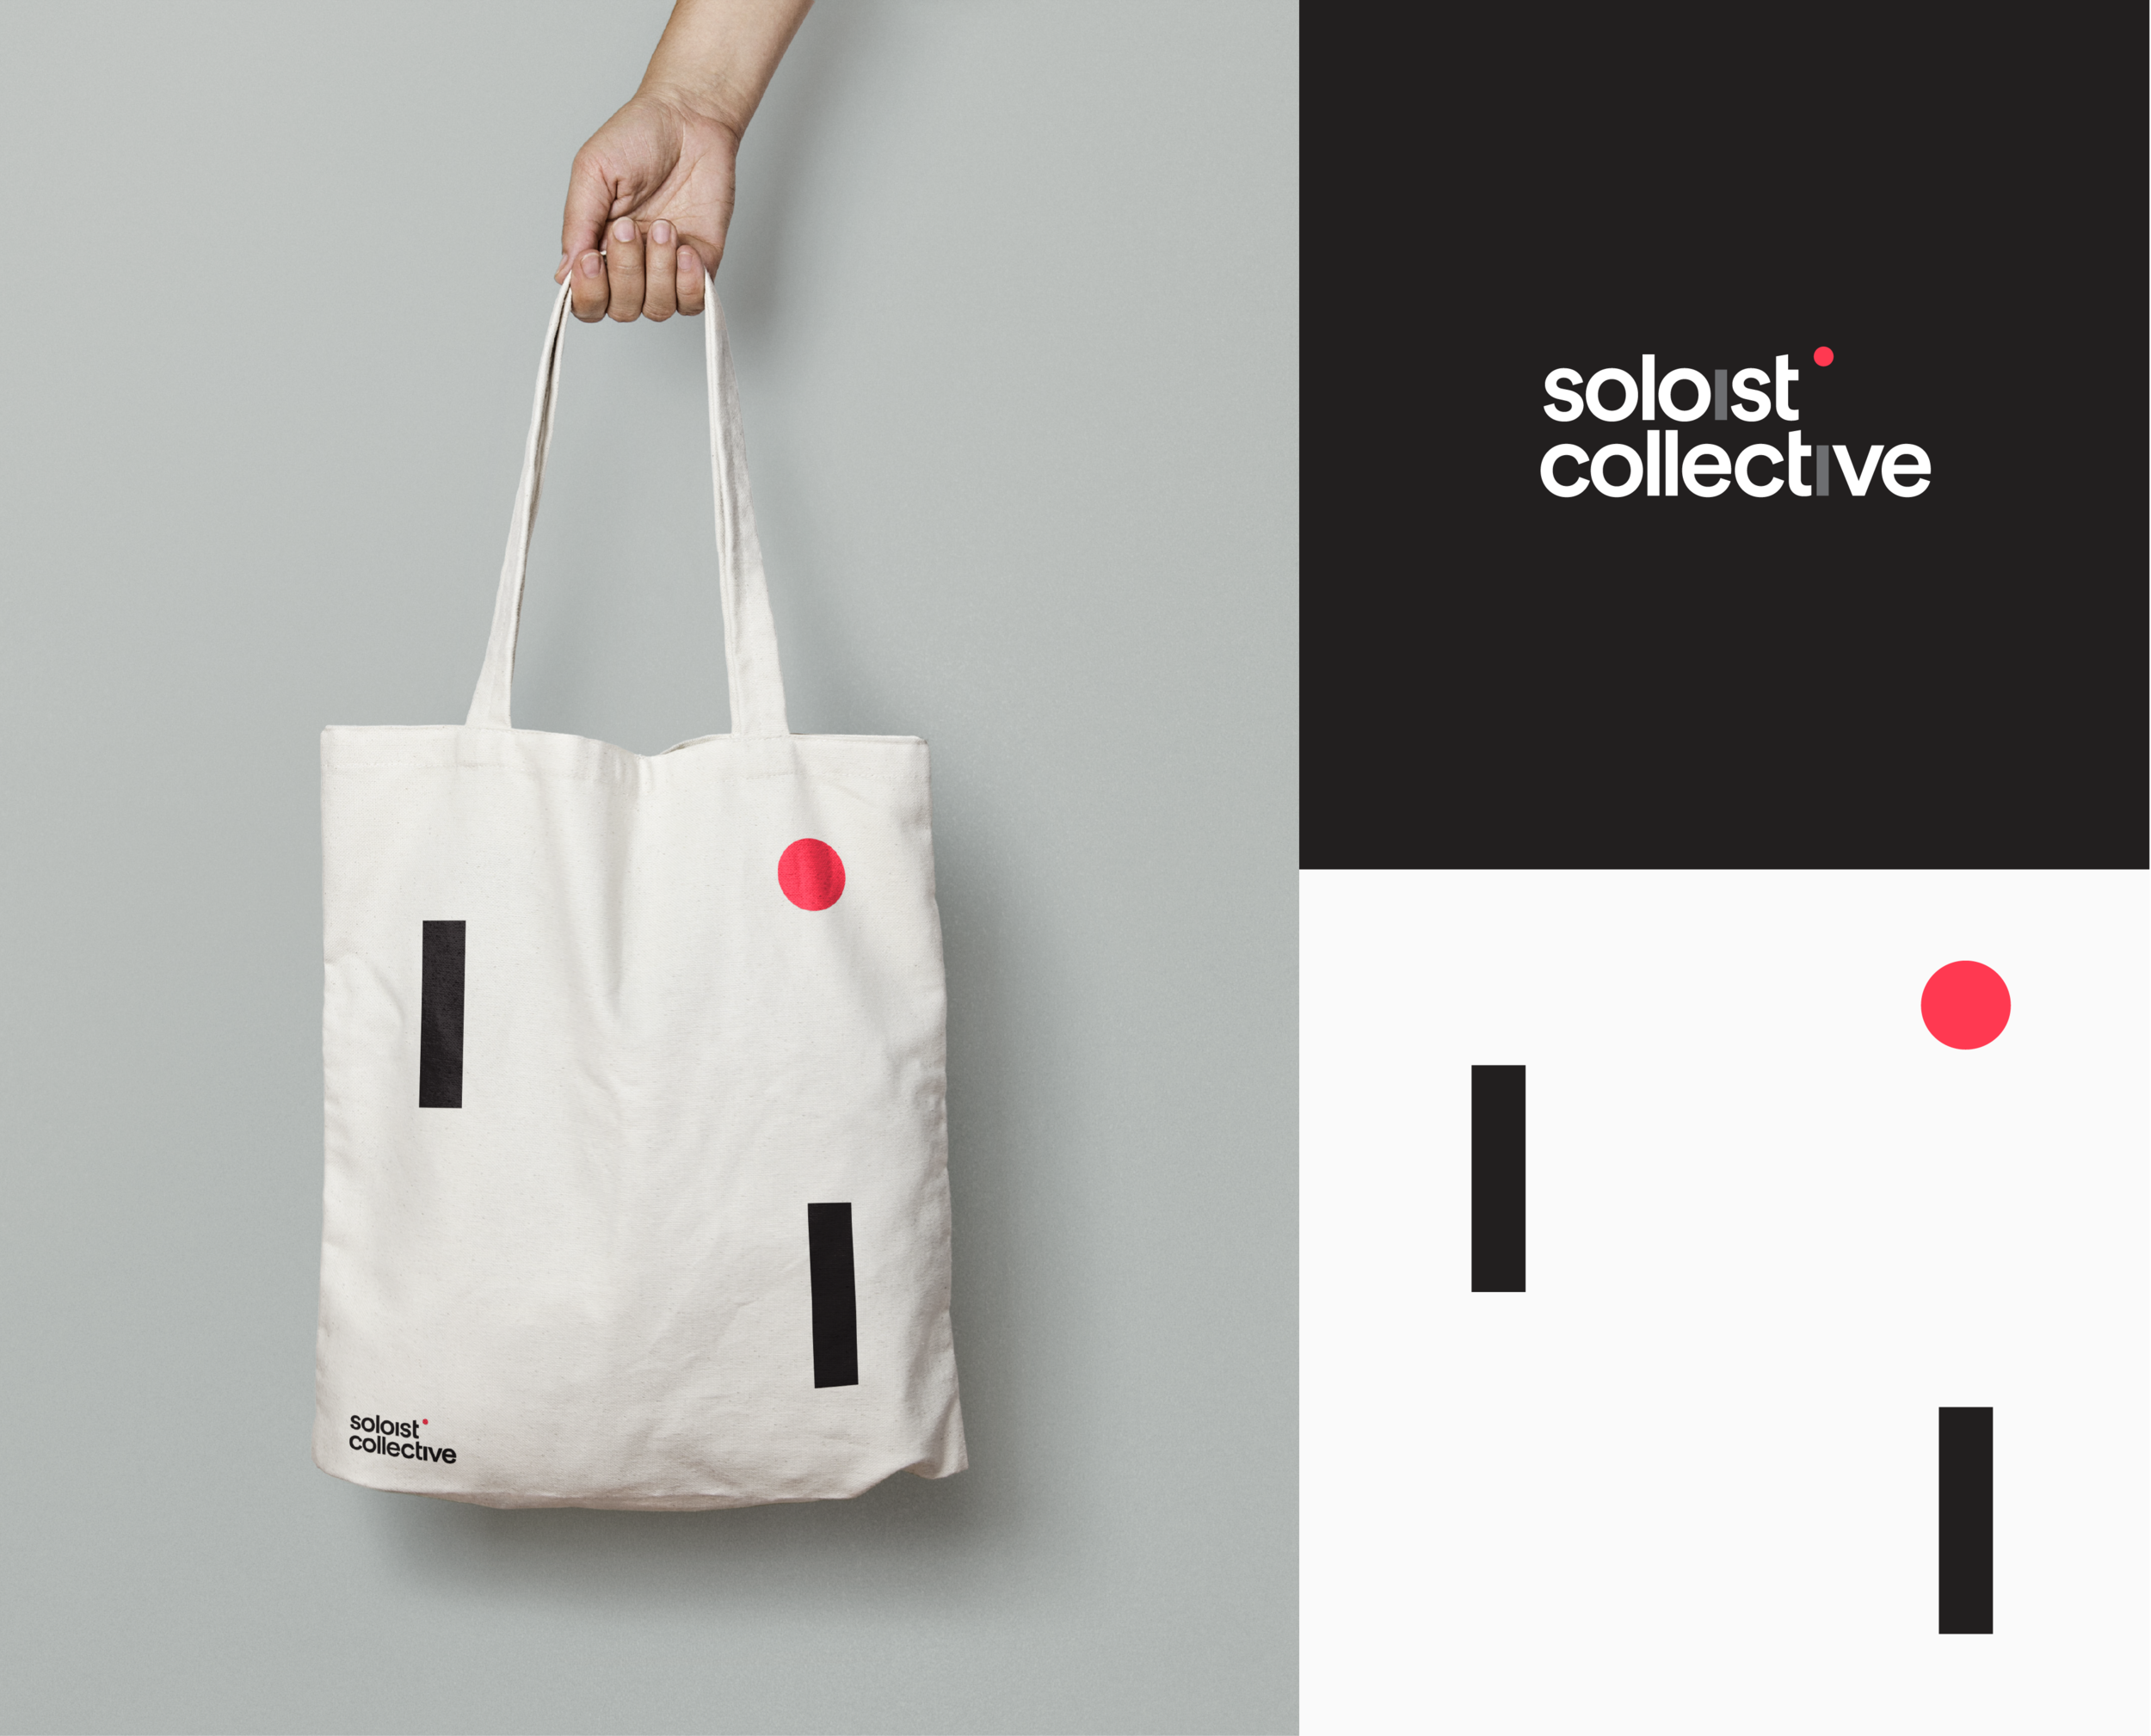 Soloist collective design 4@2x.png